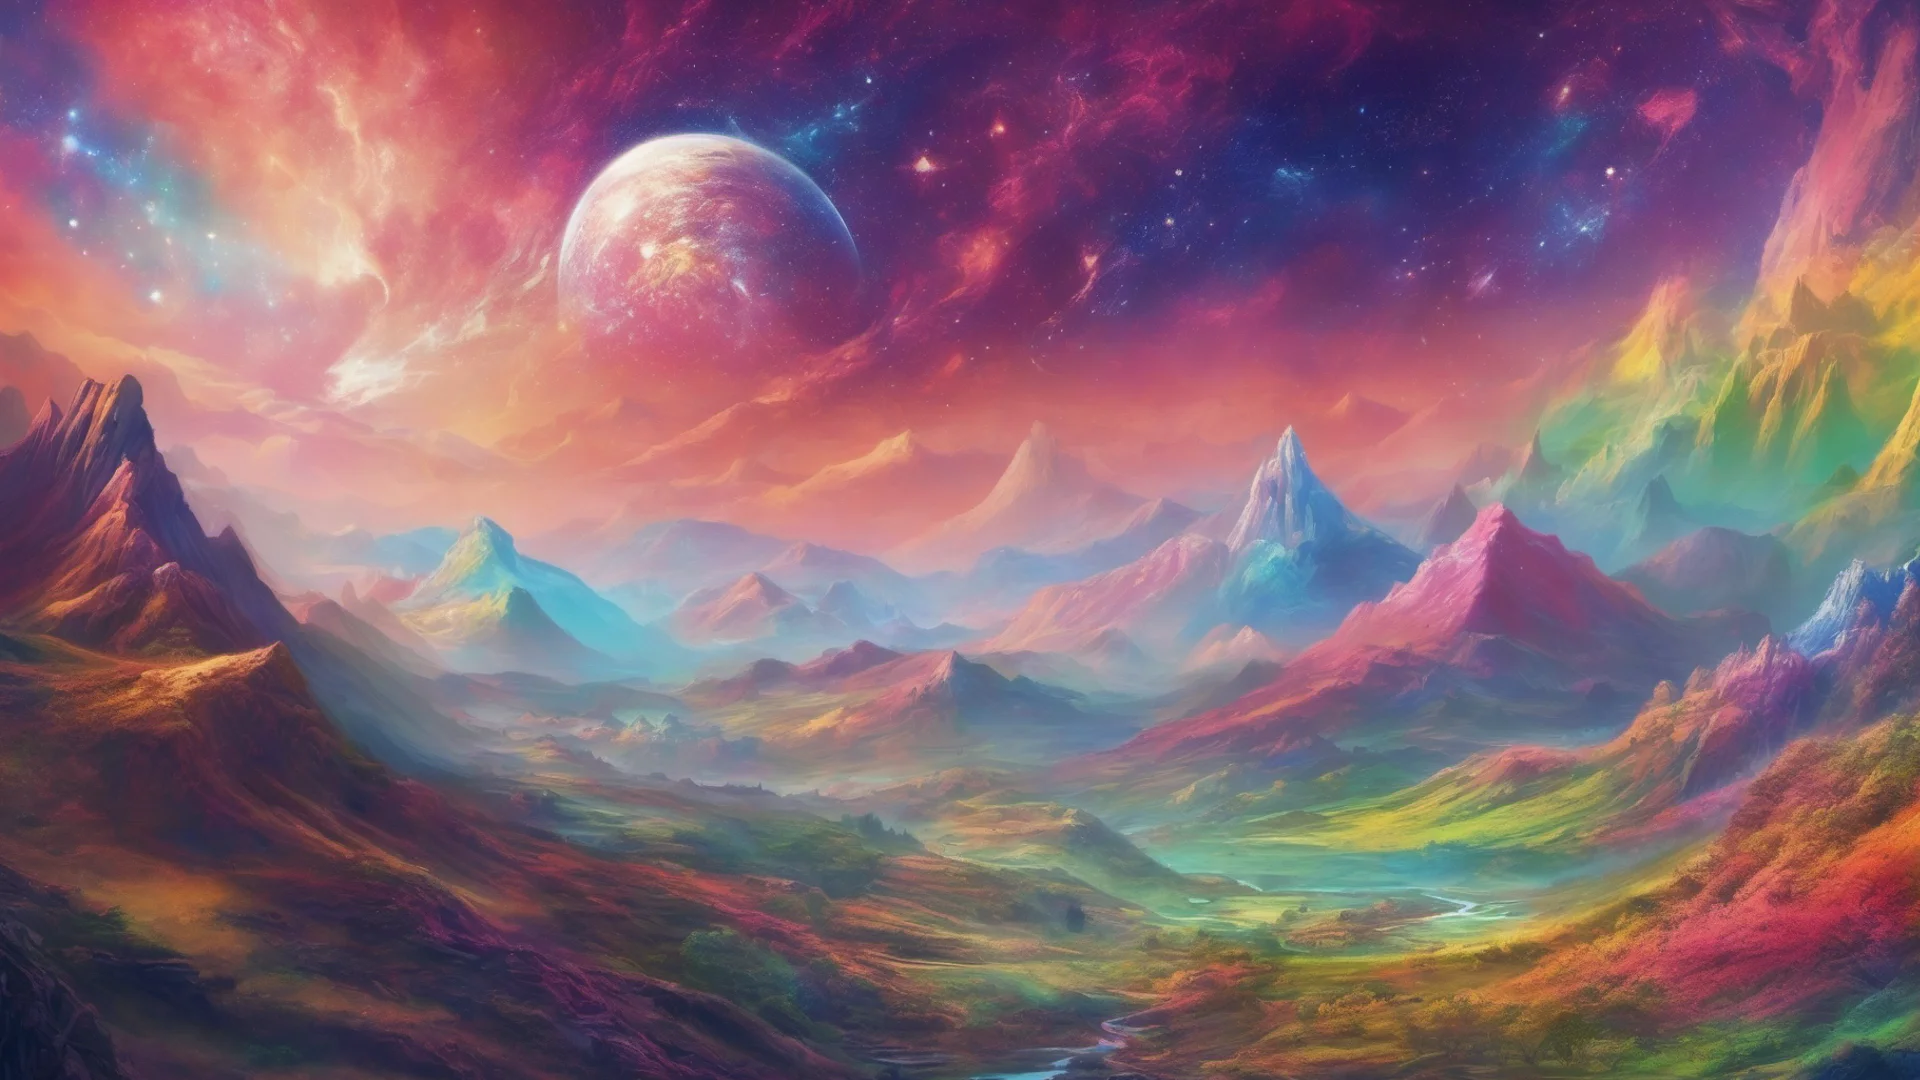 hills valleys colorful fantasy universes galaxy visible amazing awesome portrait 2 wide